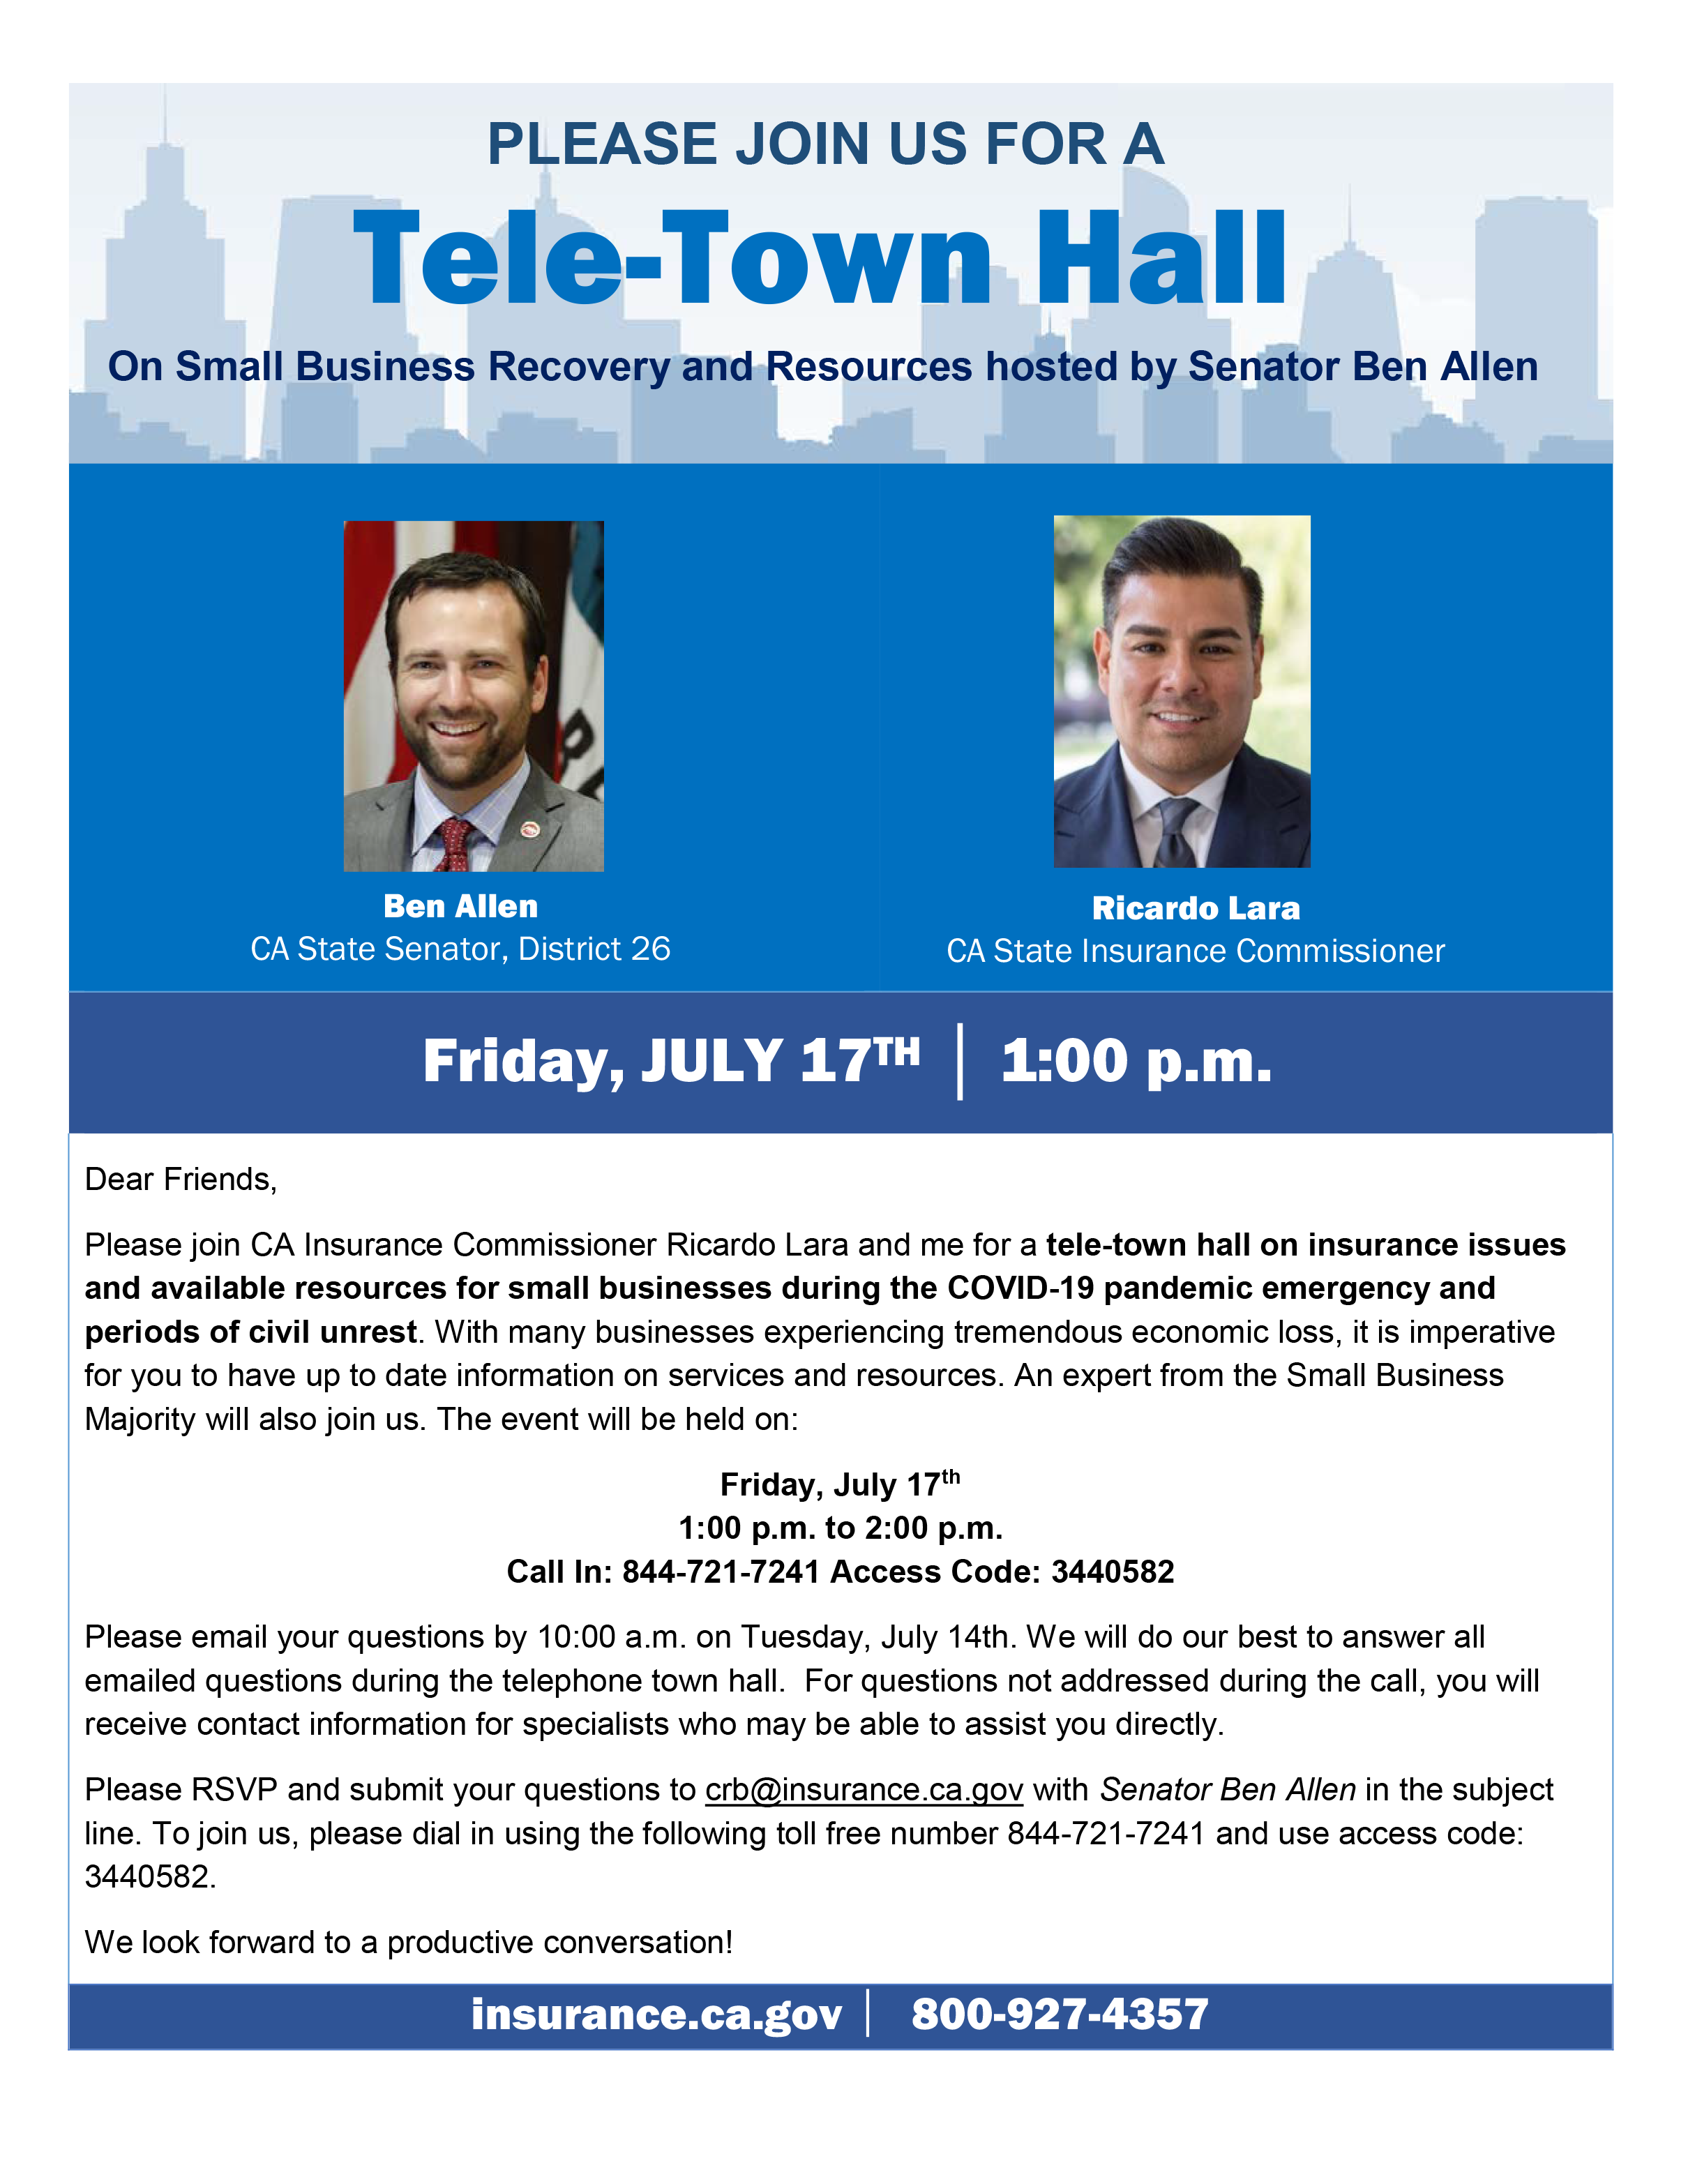 Join CA Insurance Commissioner Ricardo Lara and Senator Ben Allen for a tele-town hall on insurance issues and available resources for small businesses during the COVID-19 pandemic emergency and periods of civil unrest.